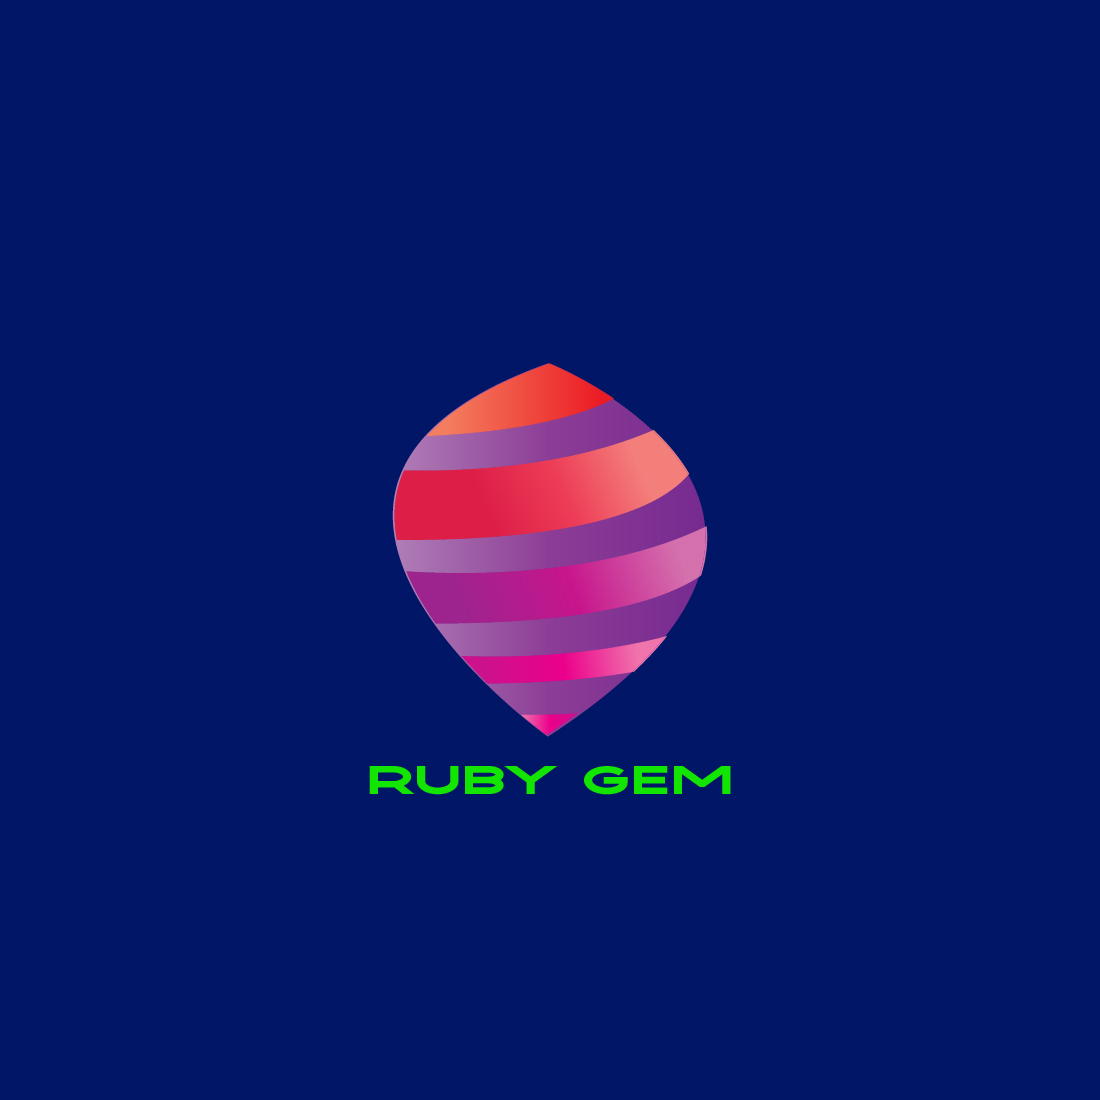 RUBY GEM preview image.